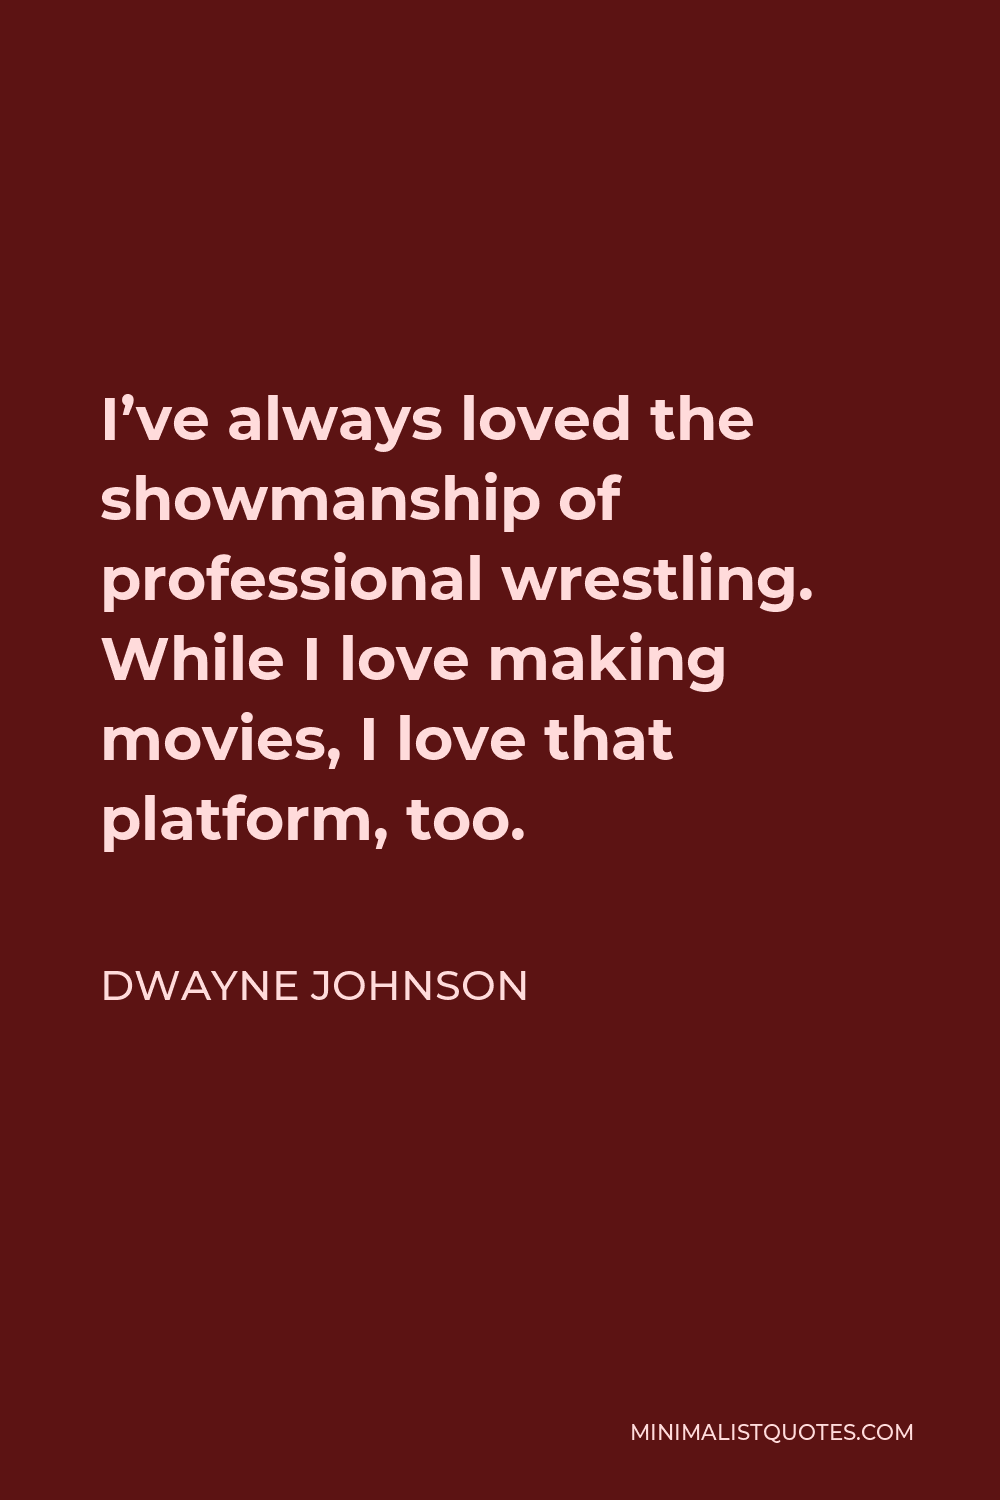 Dwayne Johnson Quote - I’ve always loved the showmanship of professional wrestling. While I love making movies, I love that platform, too.